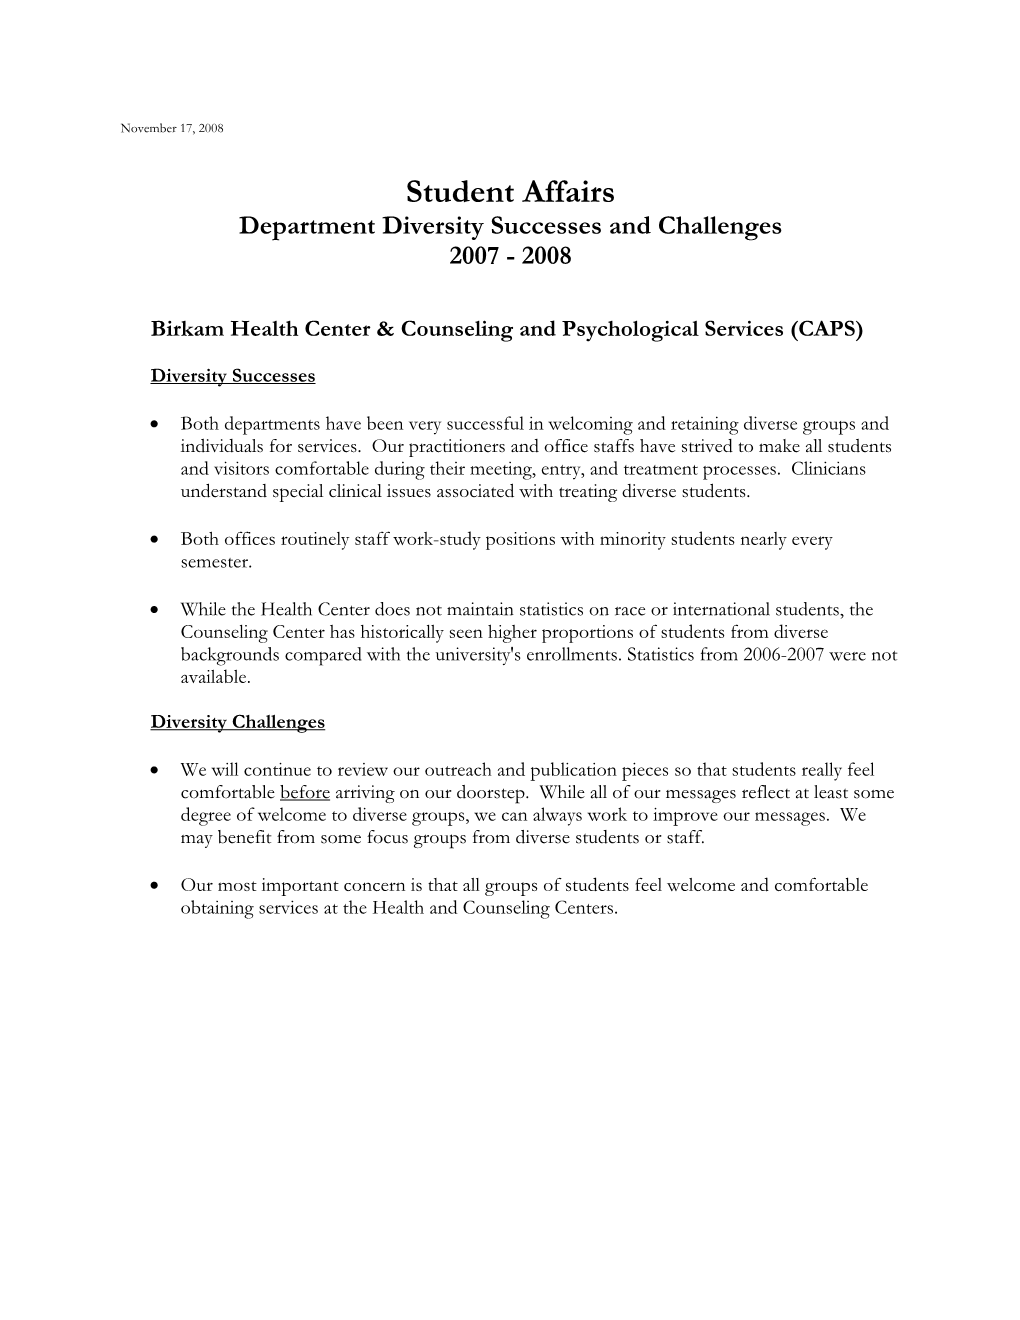 Student Affairs Department Diversity Successes and Challenges 2007 - 2008